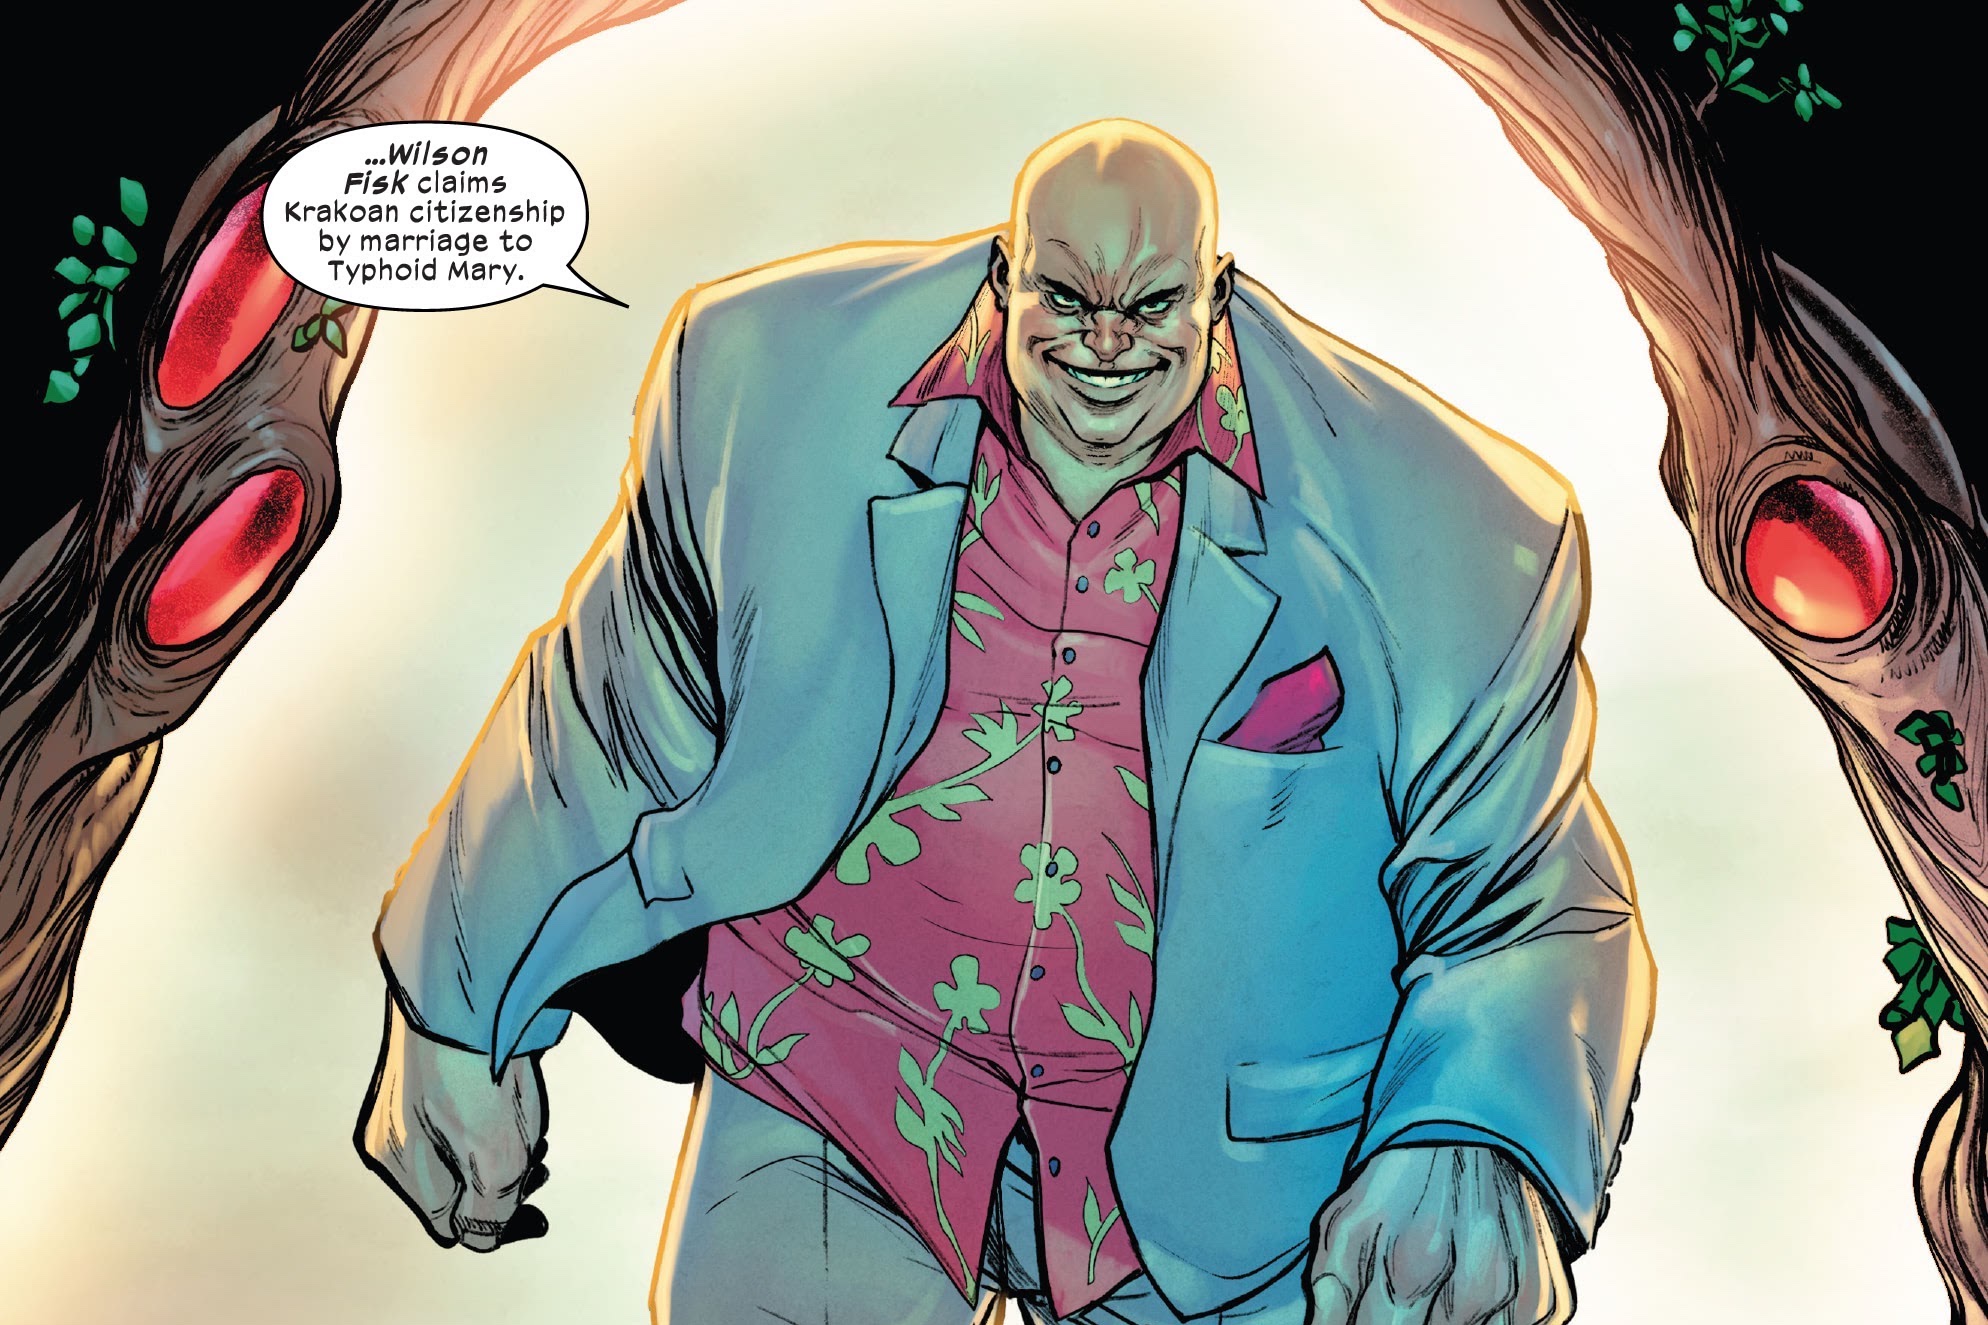 Wilson Fisk, wearing his traditional white suit and loud shirt, strikes through a Krakoan gate, and says with a sinister grin: “Wilson Fisk claims Krakoan citizenship by marriage to Typhoid Mary” in X-Men #20 (2023).